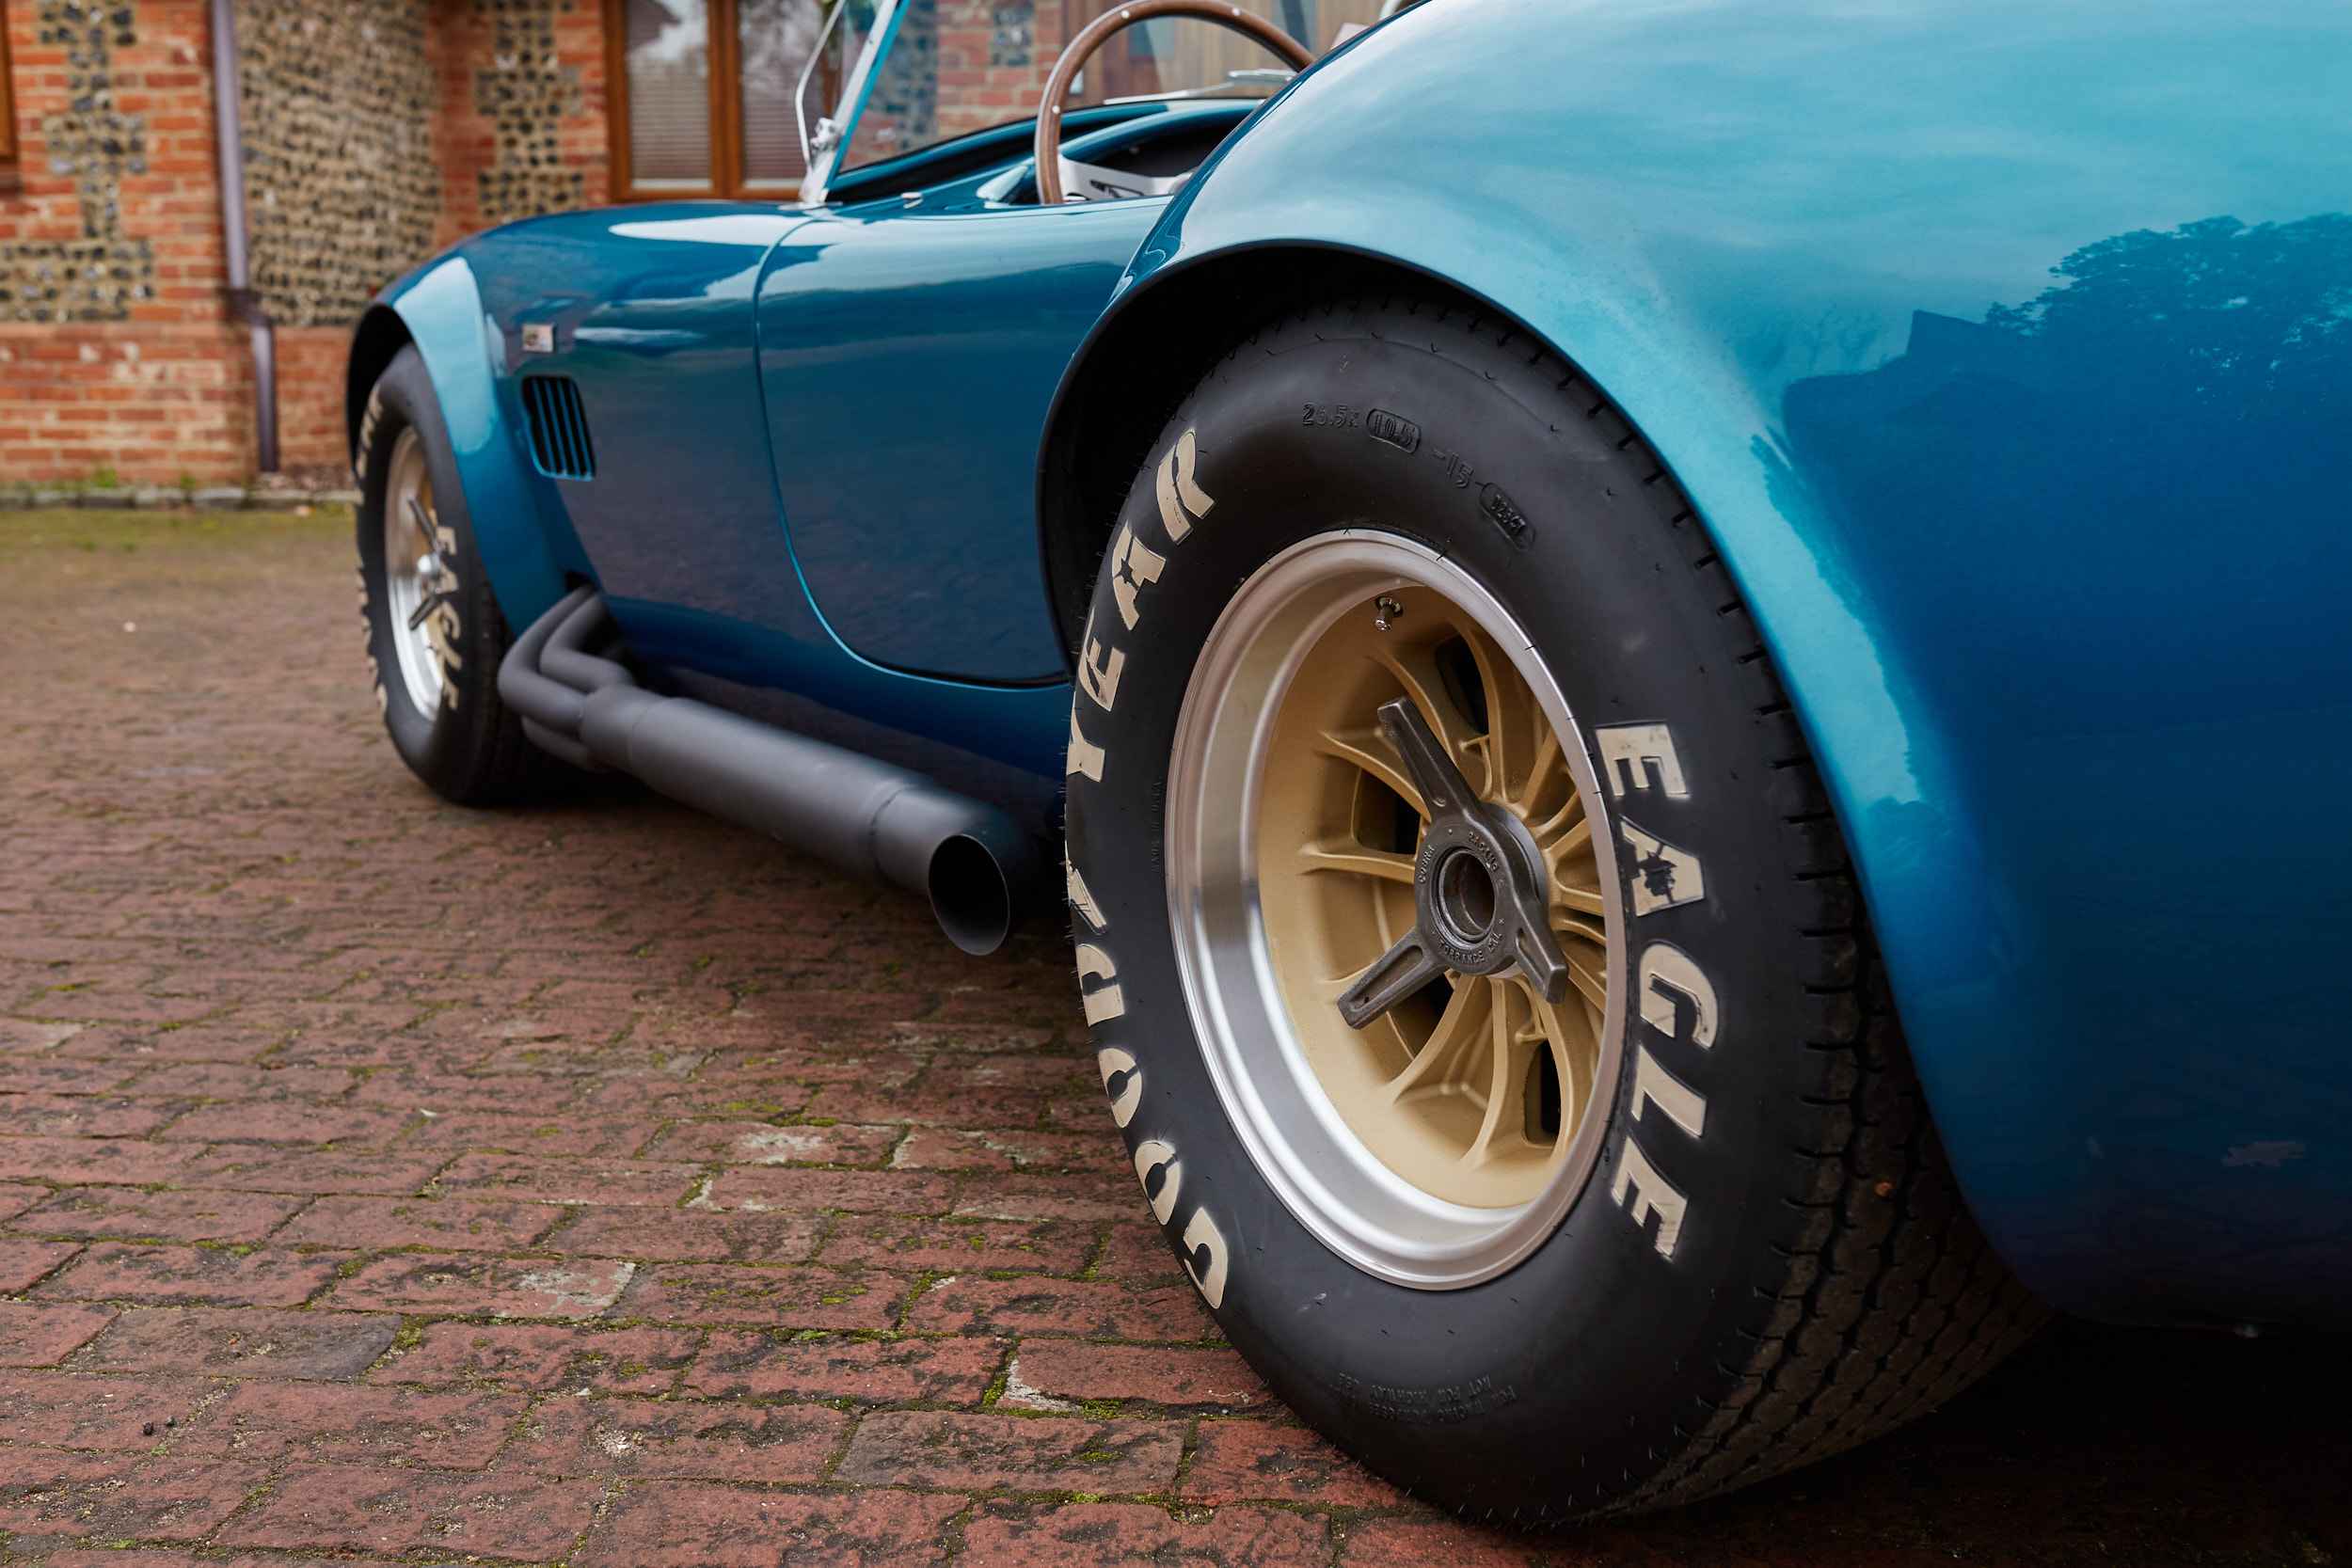 shelby-cobra-for-sale